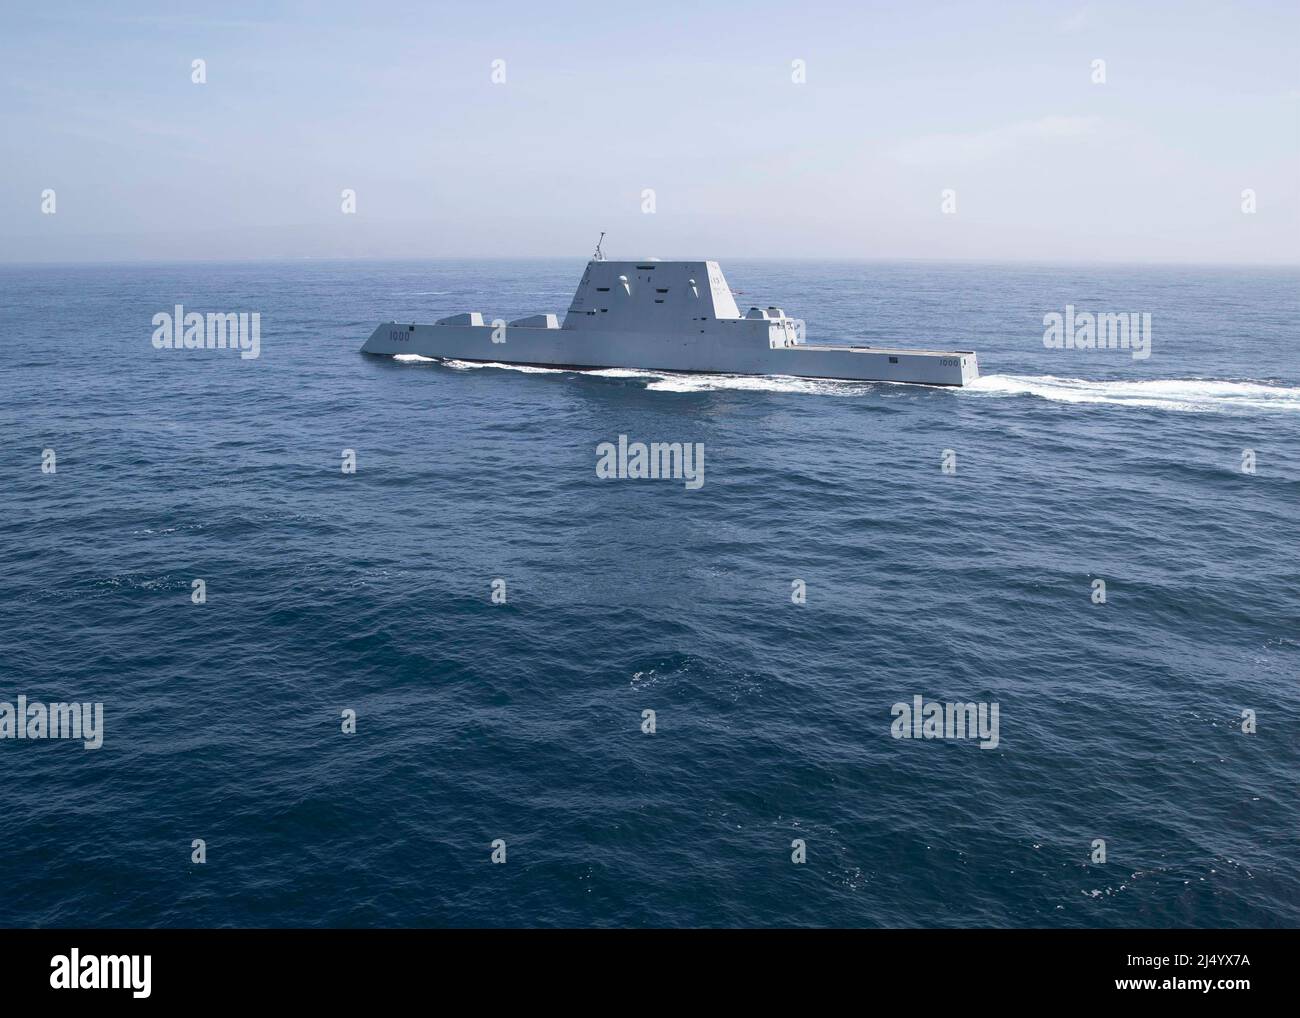 Pacific Ocean, United States. 13 April, 2022. The U.S. Navy Zumwalt-class guided-missile destroyer USS Zumwalt underway conducting routine operations April 13, 2022 in the Pacific Ocean.  Credit: MC2 Malcolm Kelley/Planetpix/Alamy Live News Stock Photo